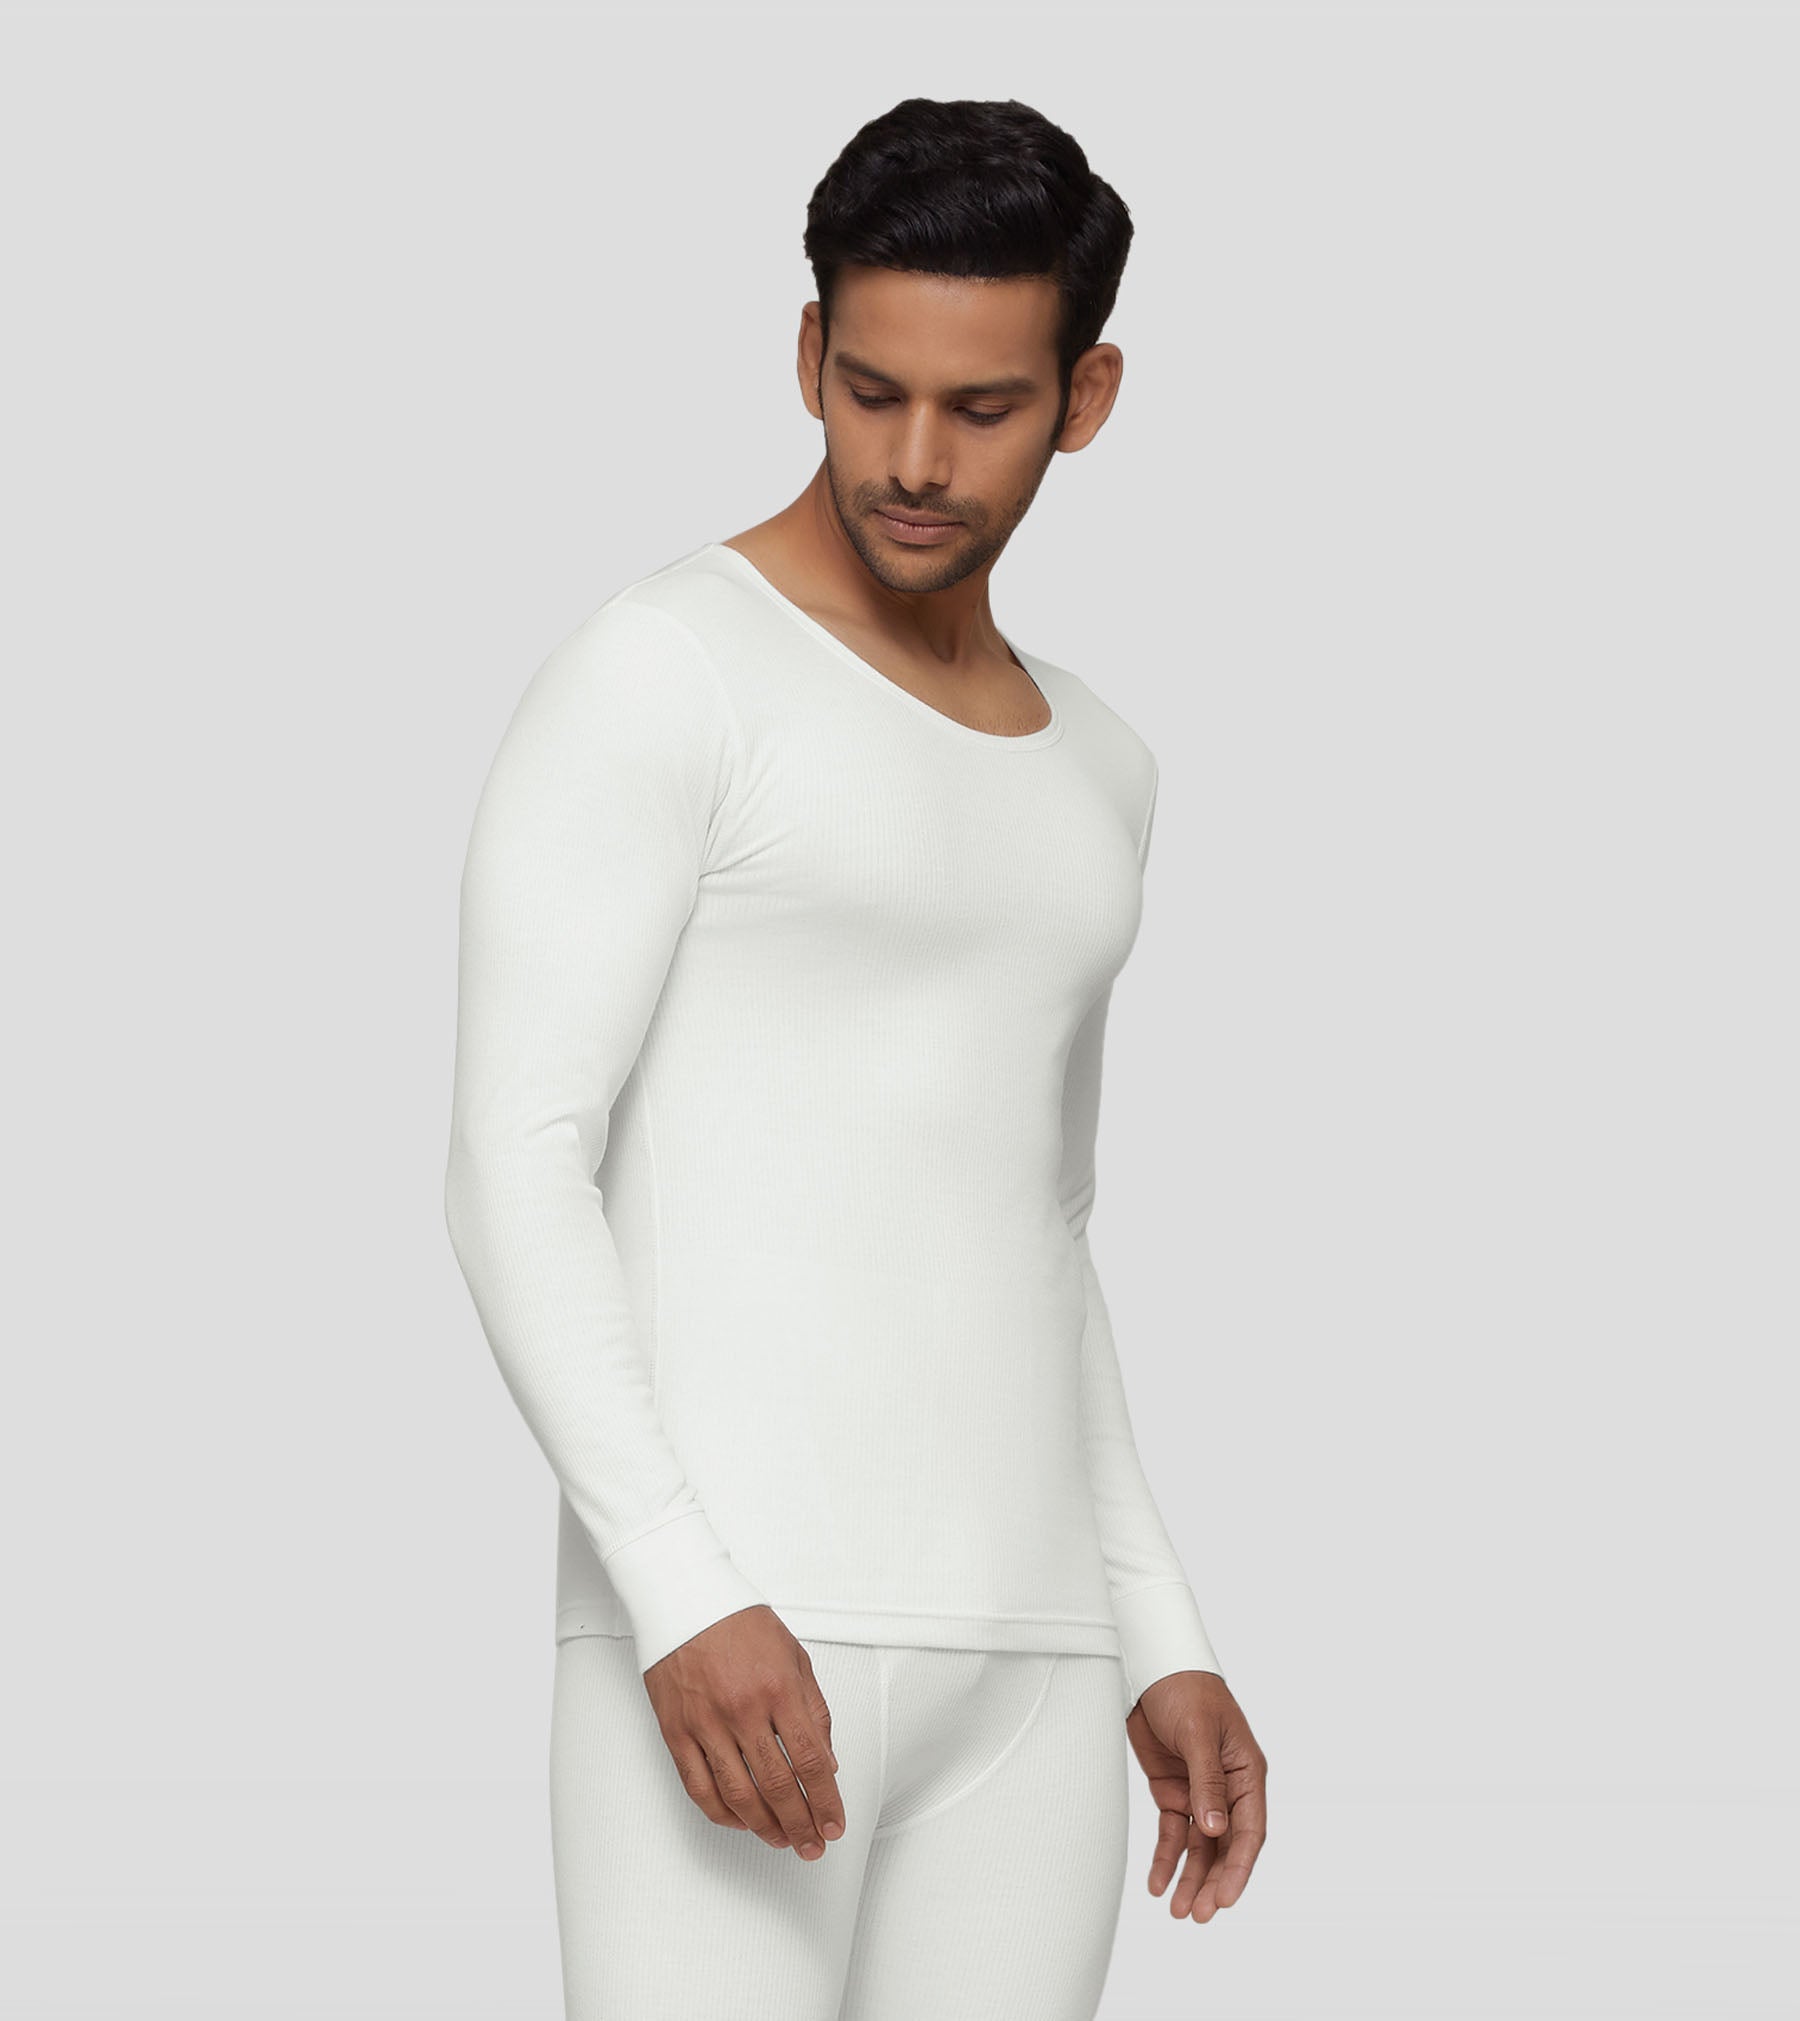 Womens Thermal Underwear Men Winter Thermal Underwear Tops Body Sleeveless  Vest Invisible Thermo Warmer Large Waist 4XLL231005 From Bingcoholnciaga,  $4.43